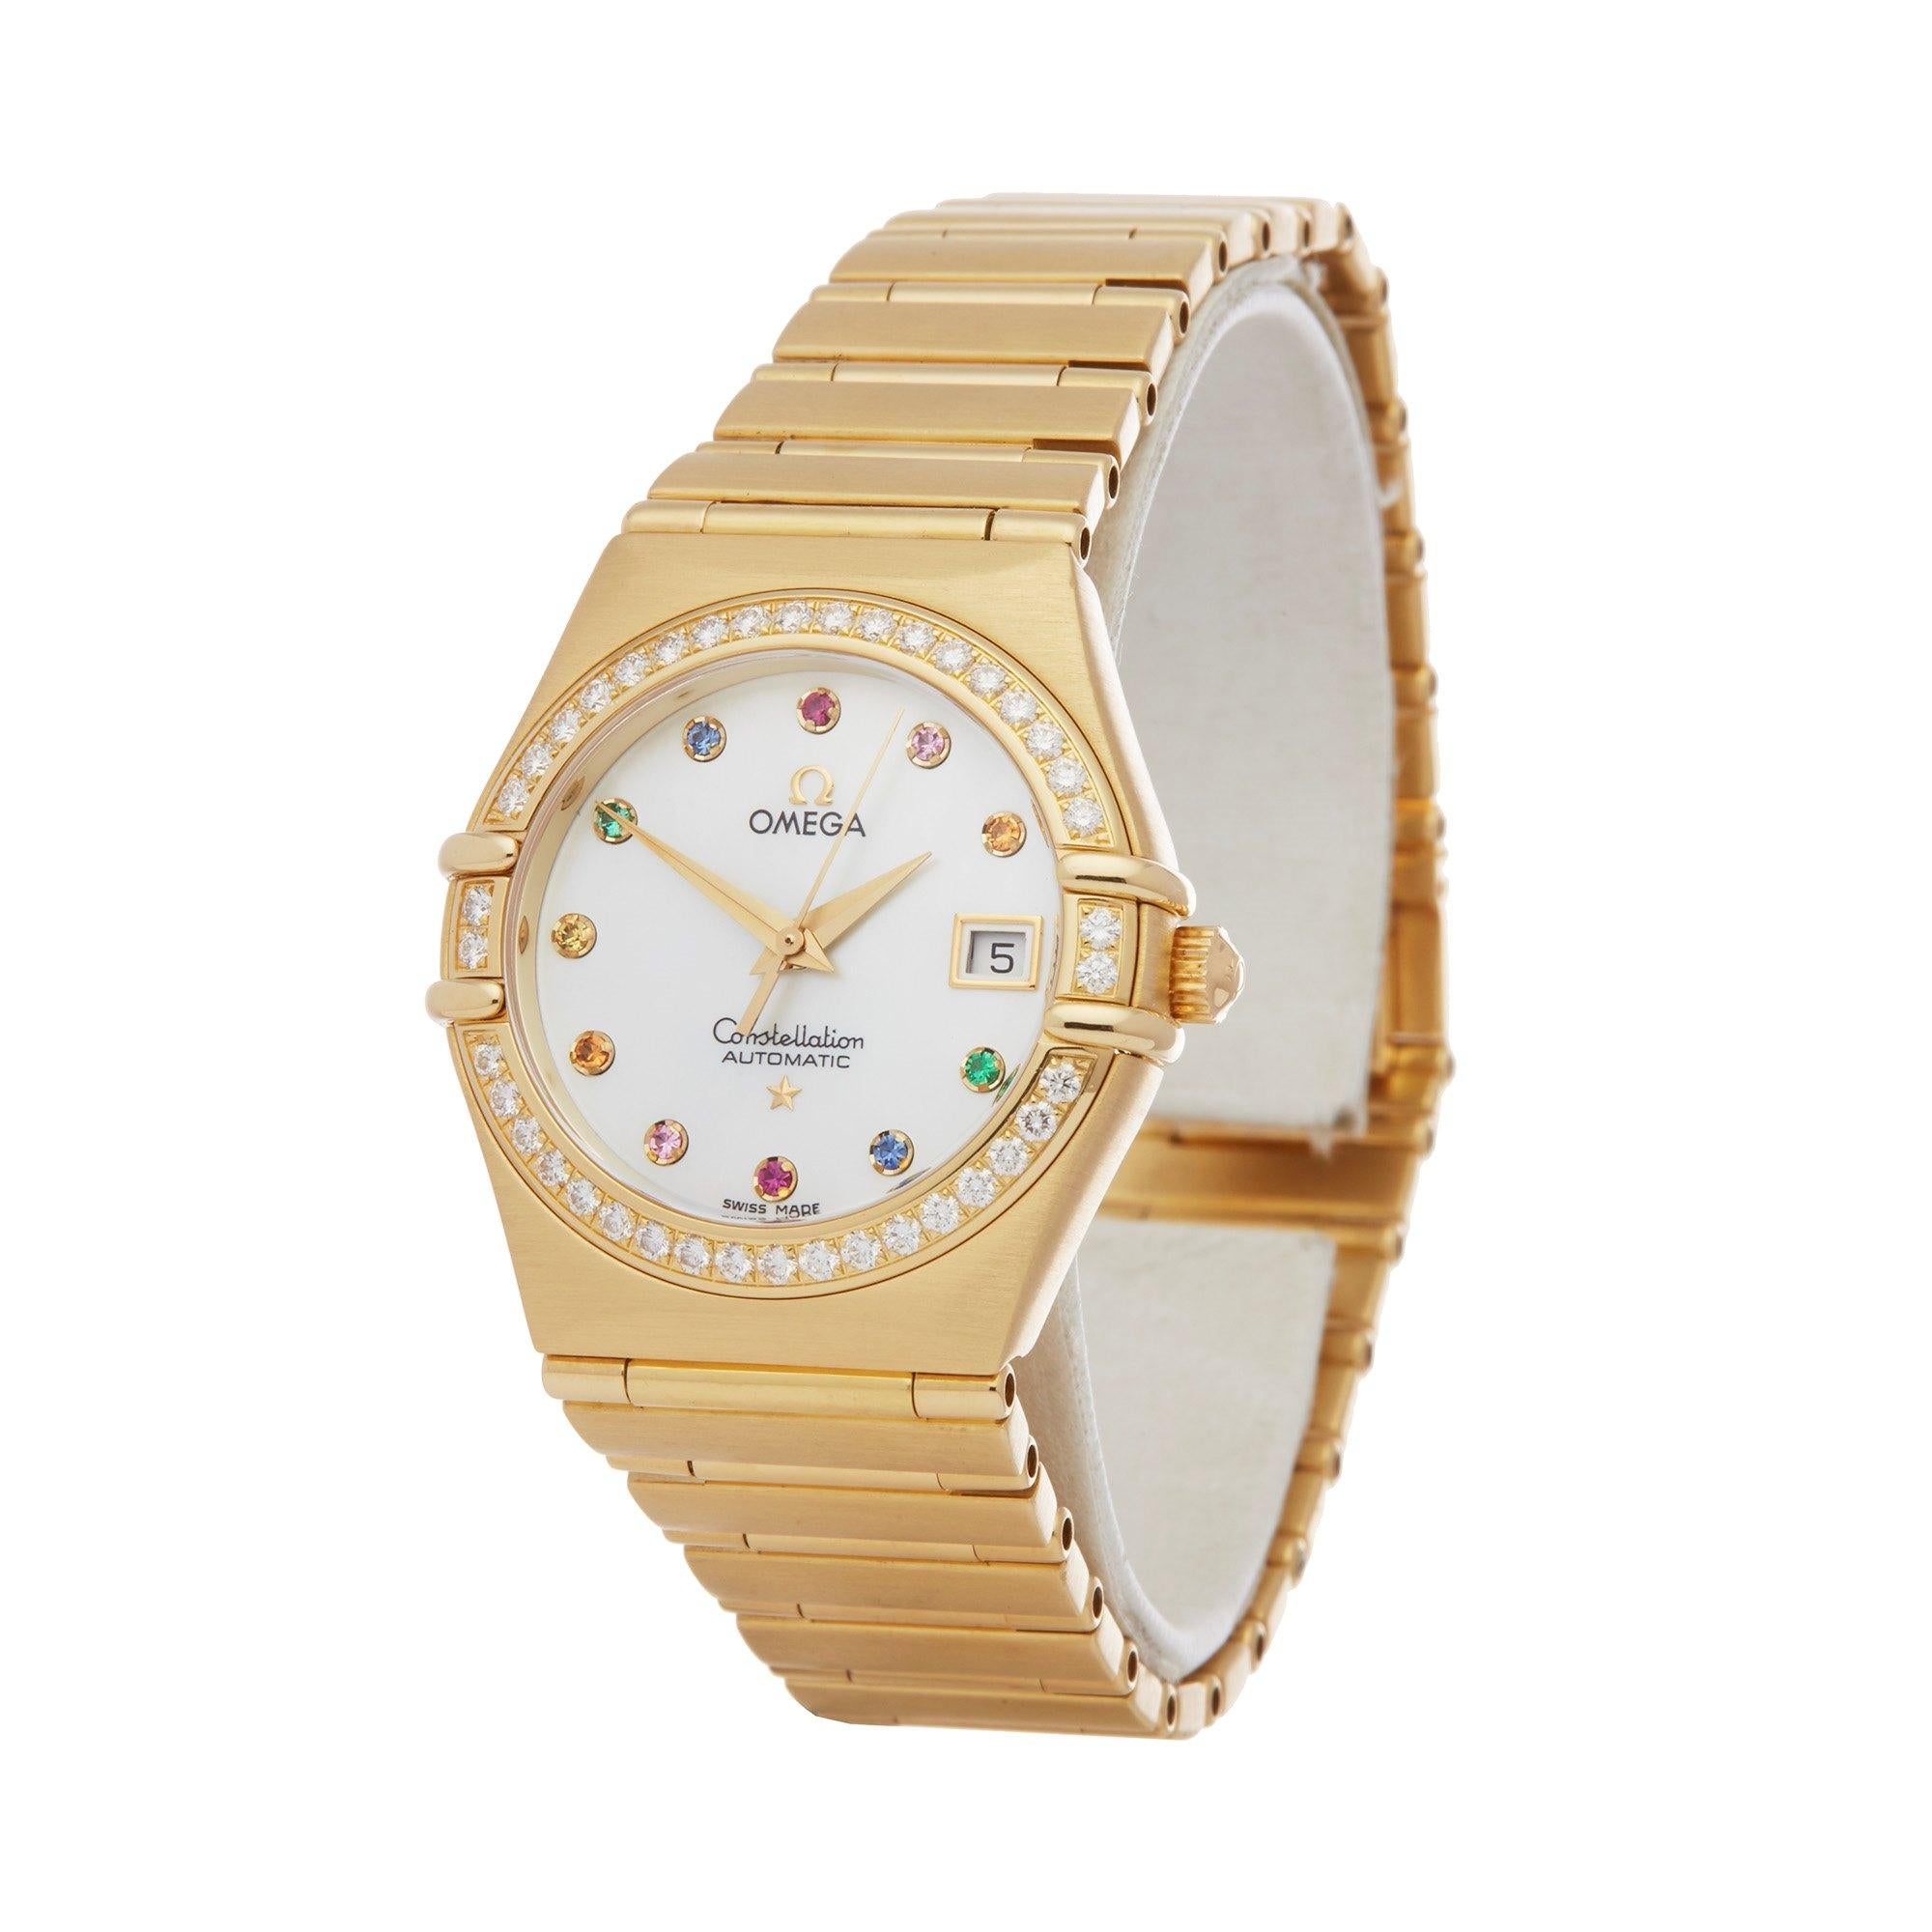 Xupes Reference: W007392
Manufacturer: Omega
Model: Constellation
Model Variant: 
Model Number: 1197.79.00
Age: 14-04-2011
Gender: Ladies
Complete With: Omega Box, Manuals & Guarantee
Dial: White With Gemstone Markers
Glass: Sapphire Crystal
Case